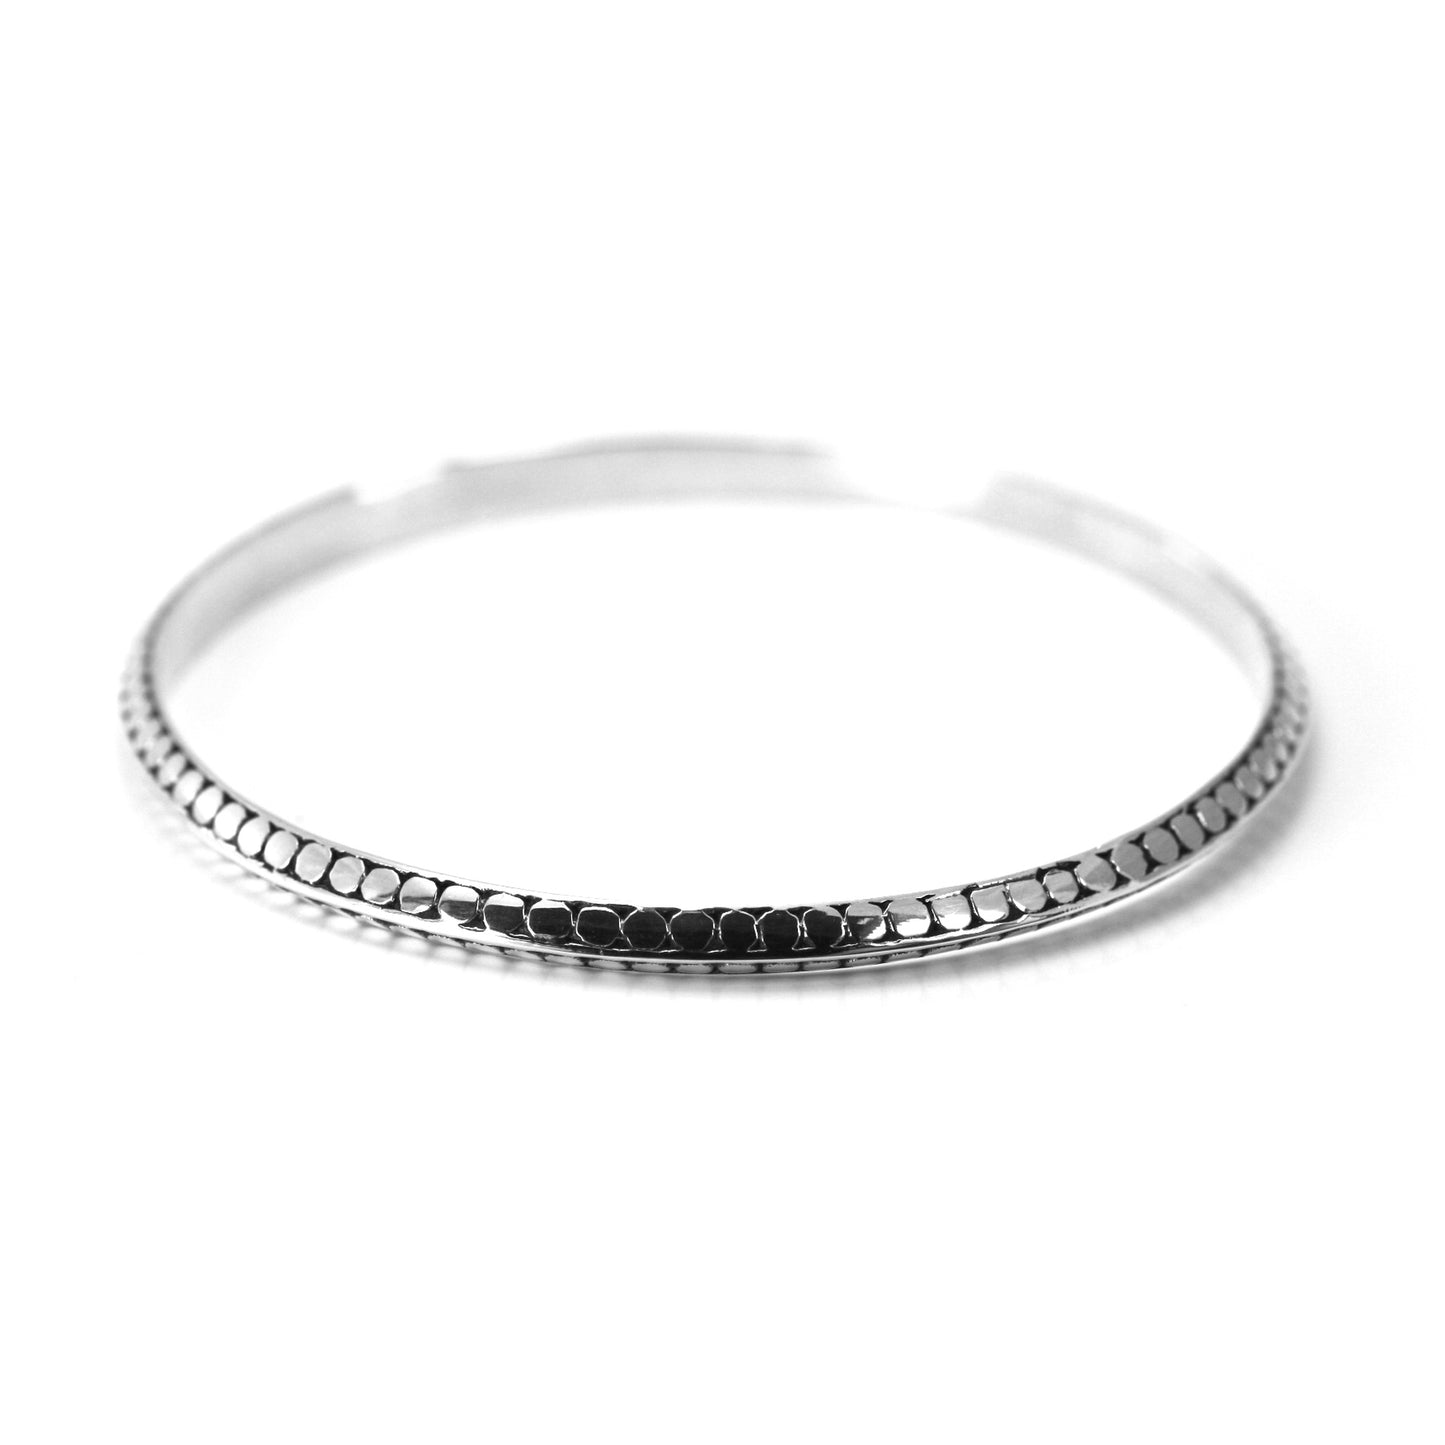 Bangle bracelet with flat dots and a triangular profile.